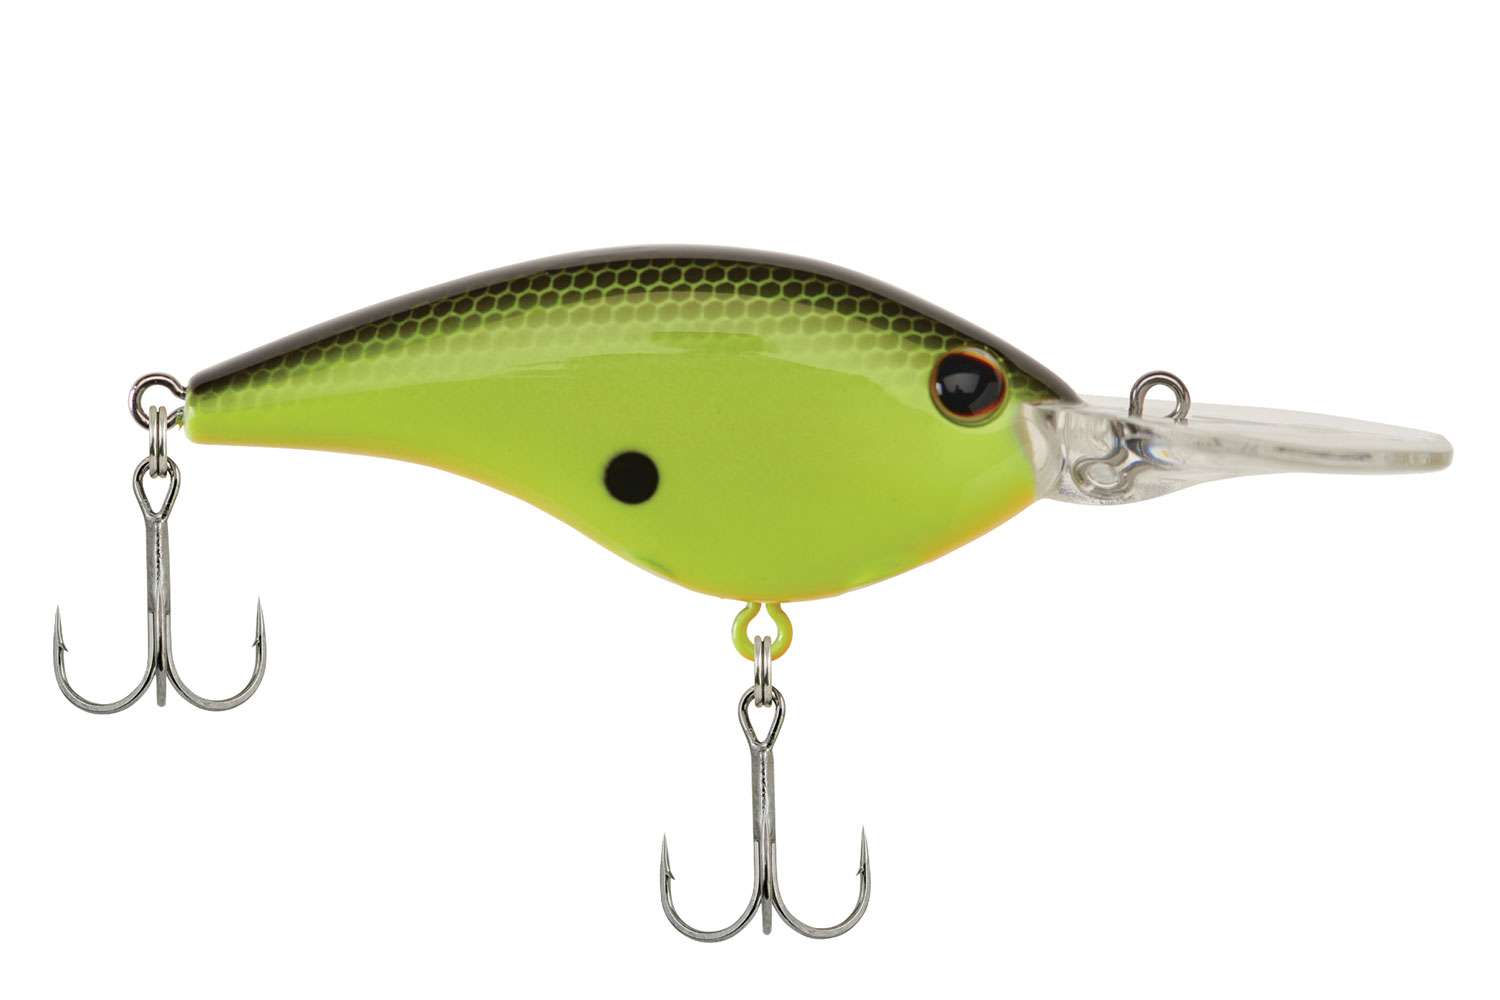 <p><b>Berkley Frittside</b></p>
A take on a classic bait design with legendary crankbait angler David Fritts. The Berkley Frittside crankbait features the same proven action that won David the Bassmaster Classic. With proven balsa actions and the durability and casting performance of a plastic bait, the Frittside is a key presentation for tough conditions when bass are sluggish or heavily pressured. Balanced weight design for improved tracking accuracy and a weighted bill on the 7 and 9 models to get deep fast. Available in 3 sizes.<br>
<p><b>MSRP: $8.99</b></p>
<a href=